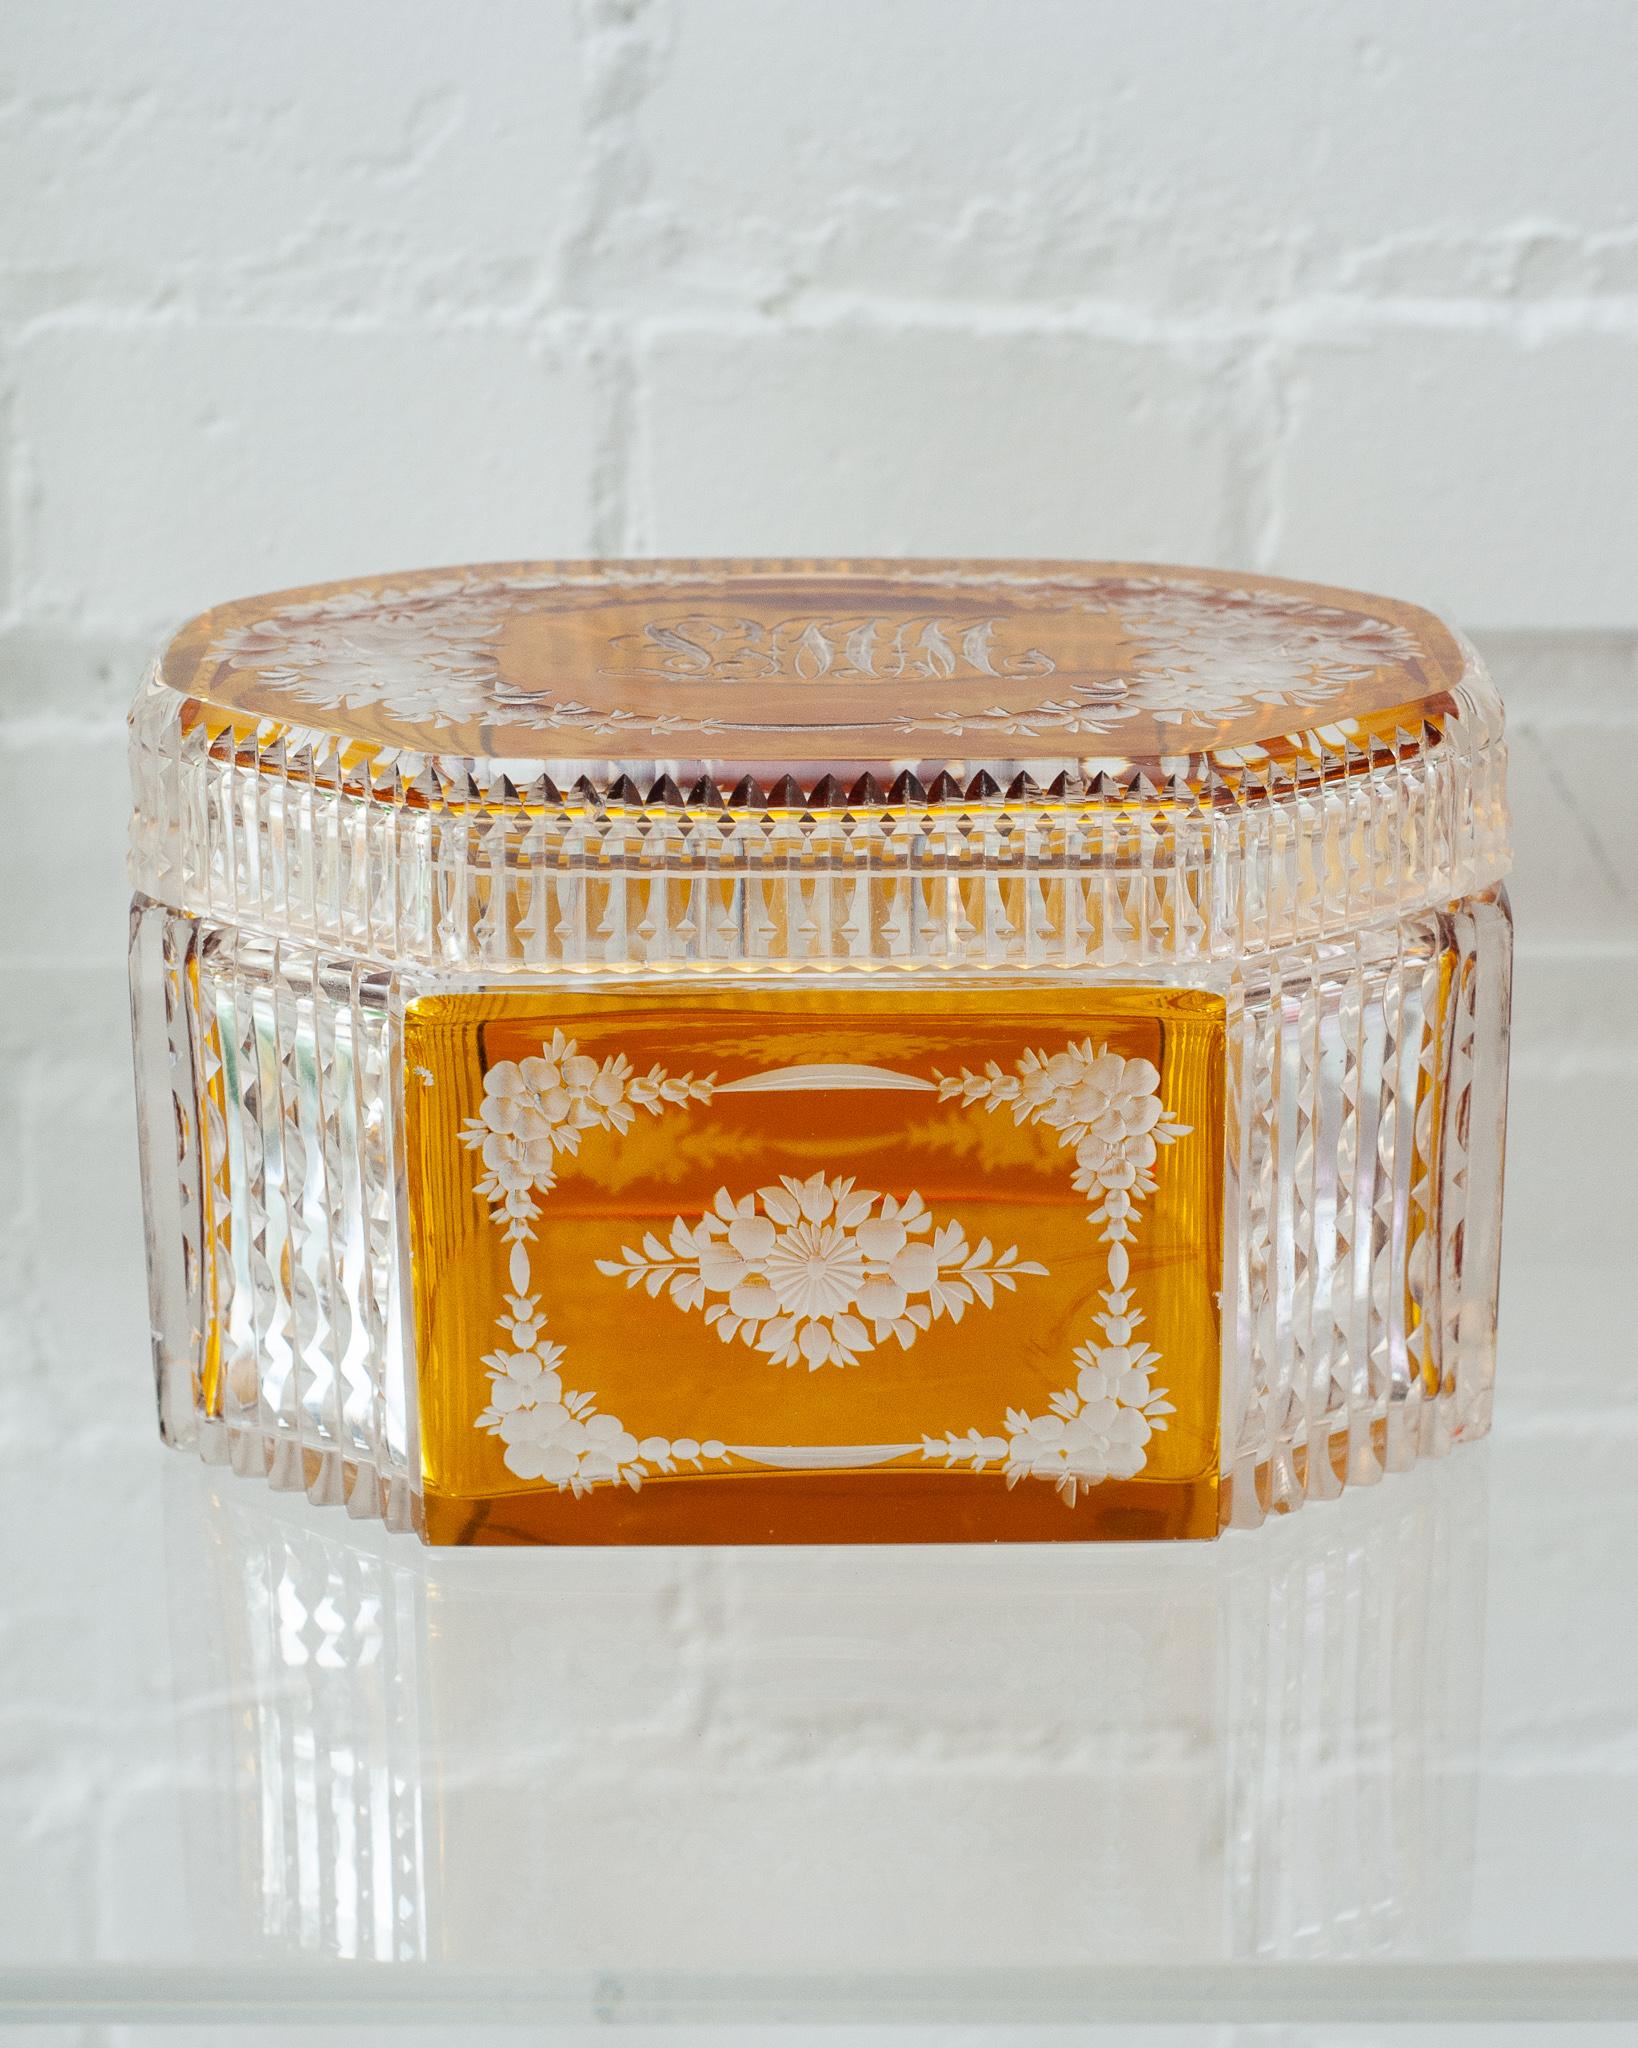 A large antique Bohemian amber glass box with cut crystal ornate floral patterns. The artistry of the cut crystal makes this vessel as beautiful as the contents you may put inside.